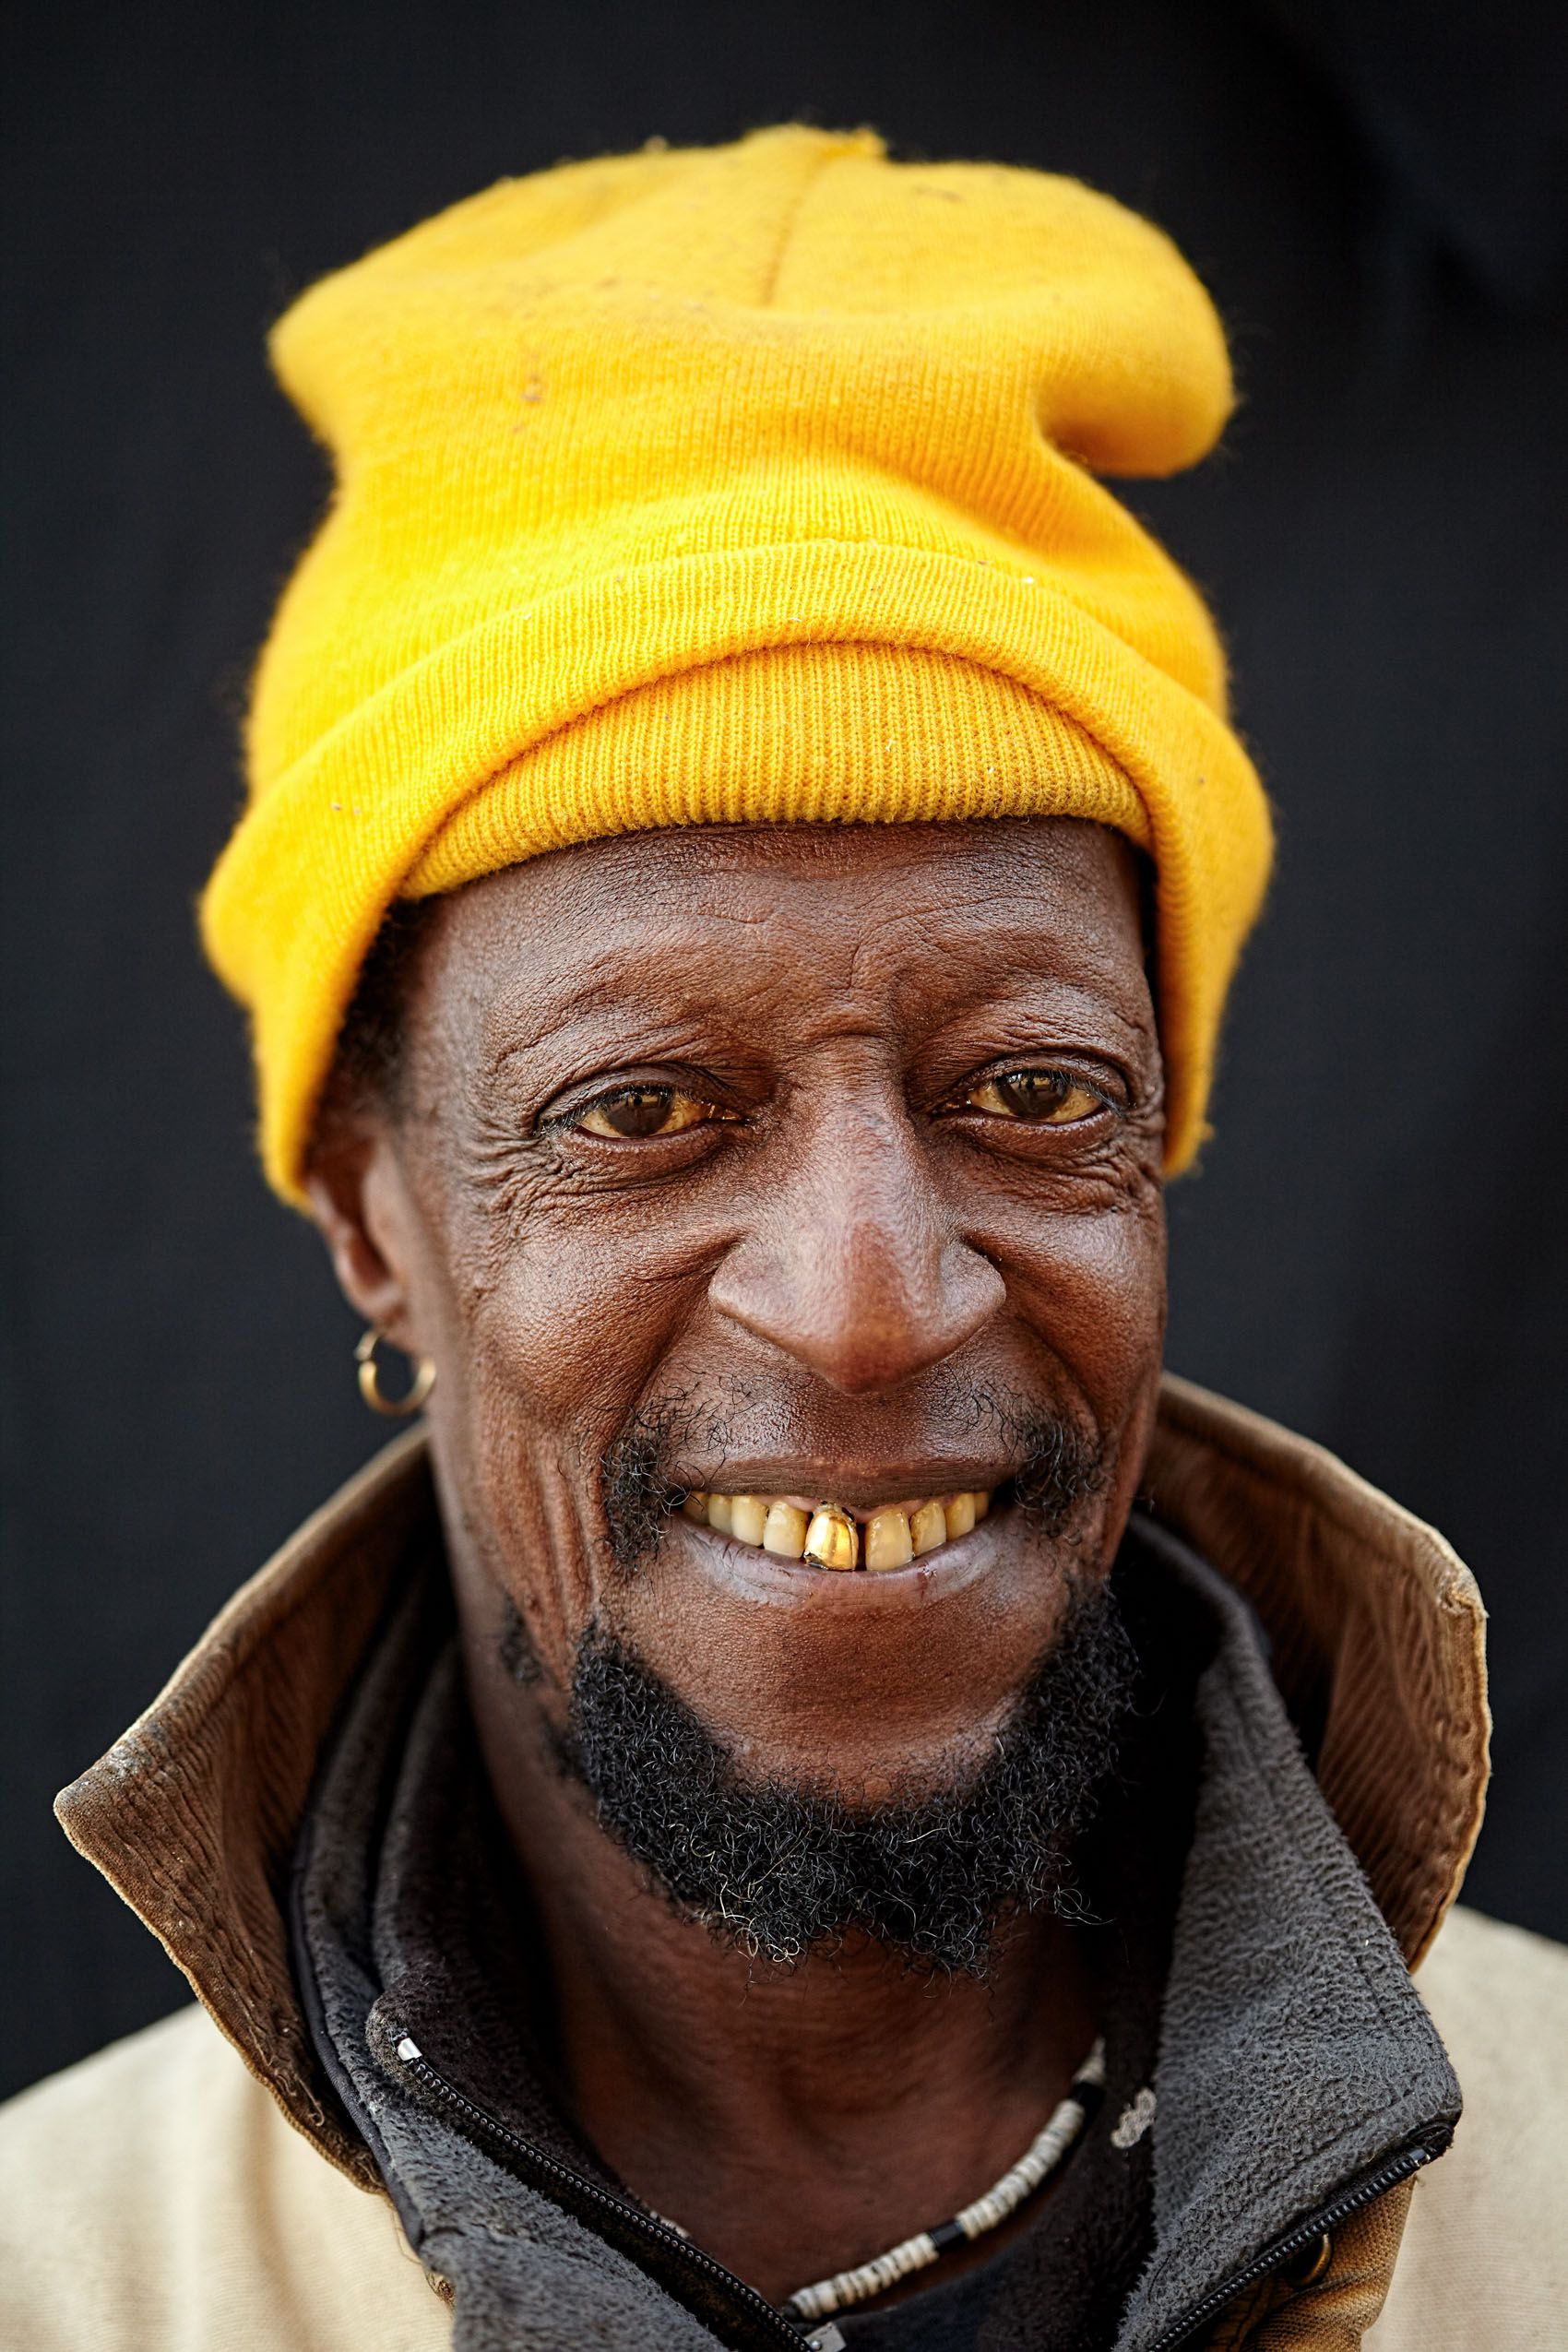 Man Smiling with Beanie